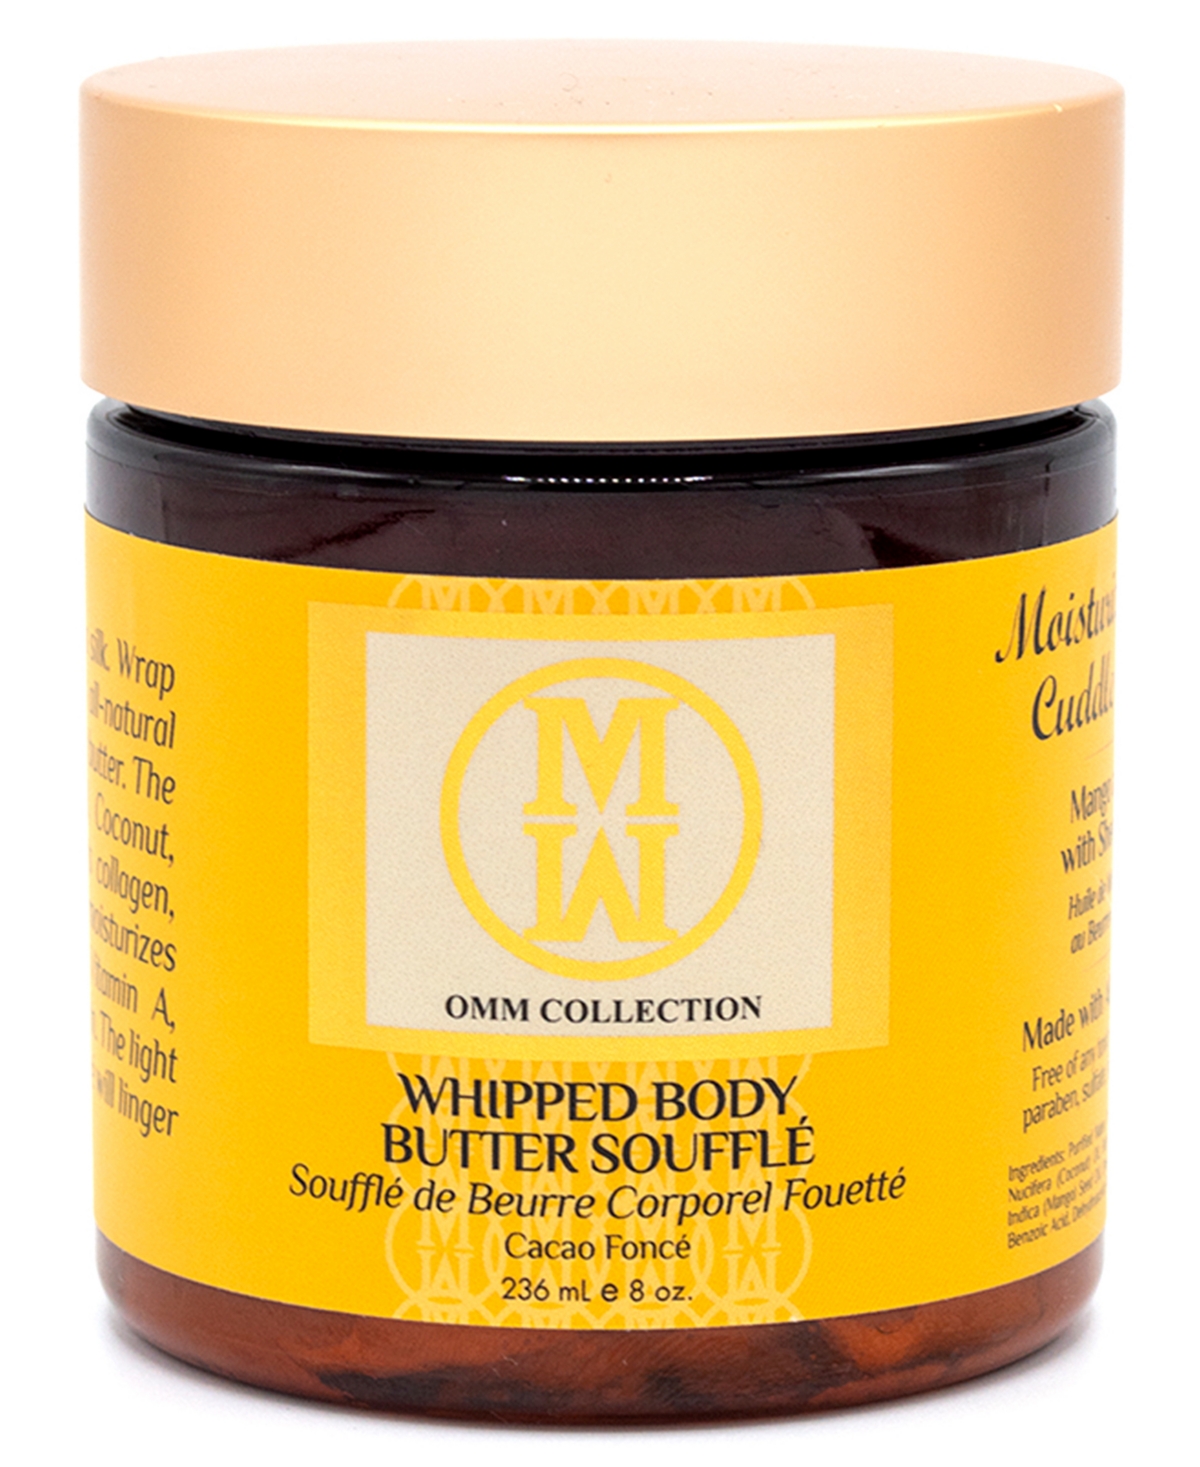 Dark Chocolate Whipped Body Butter, 8 oz